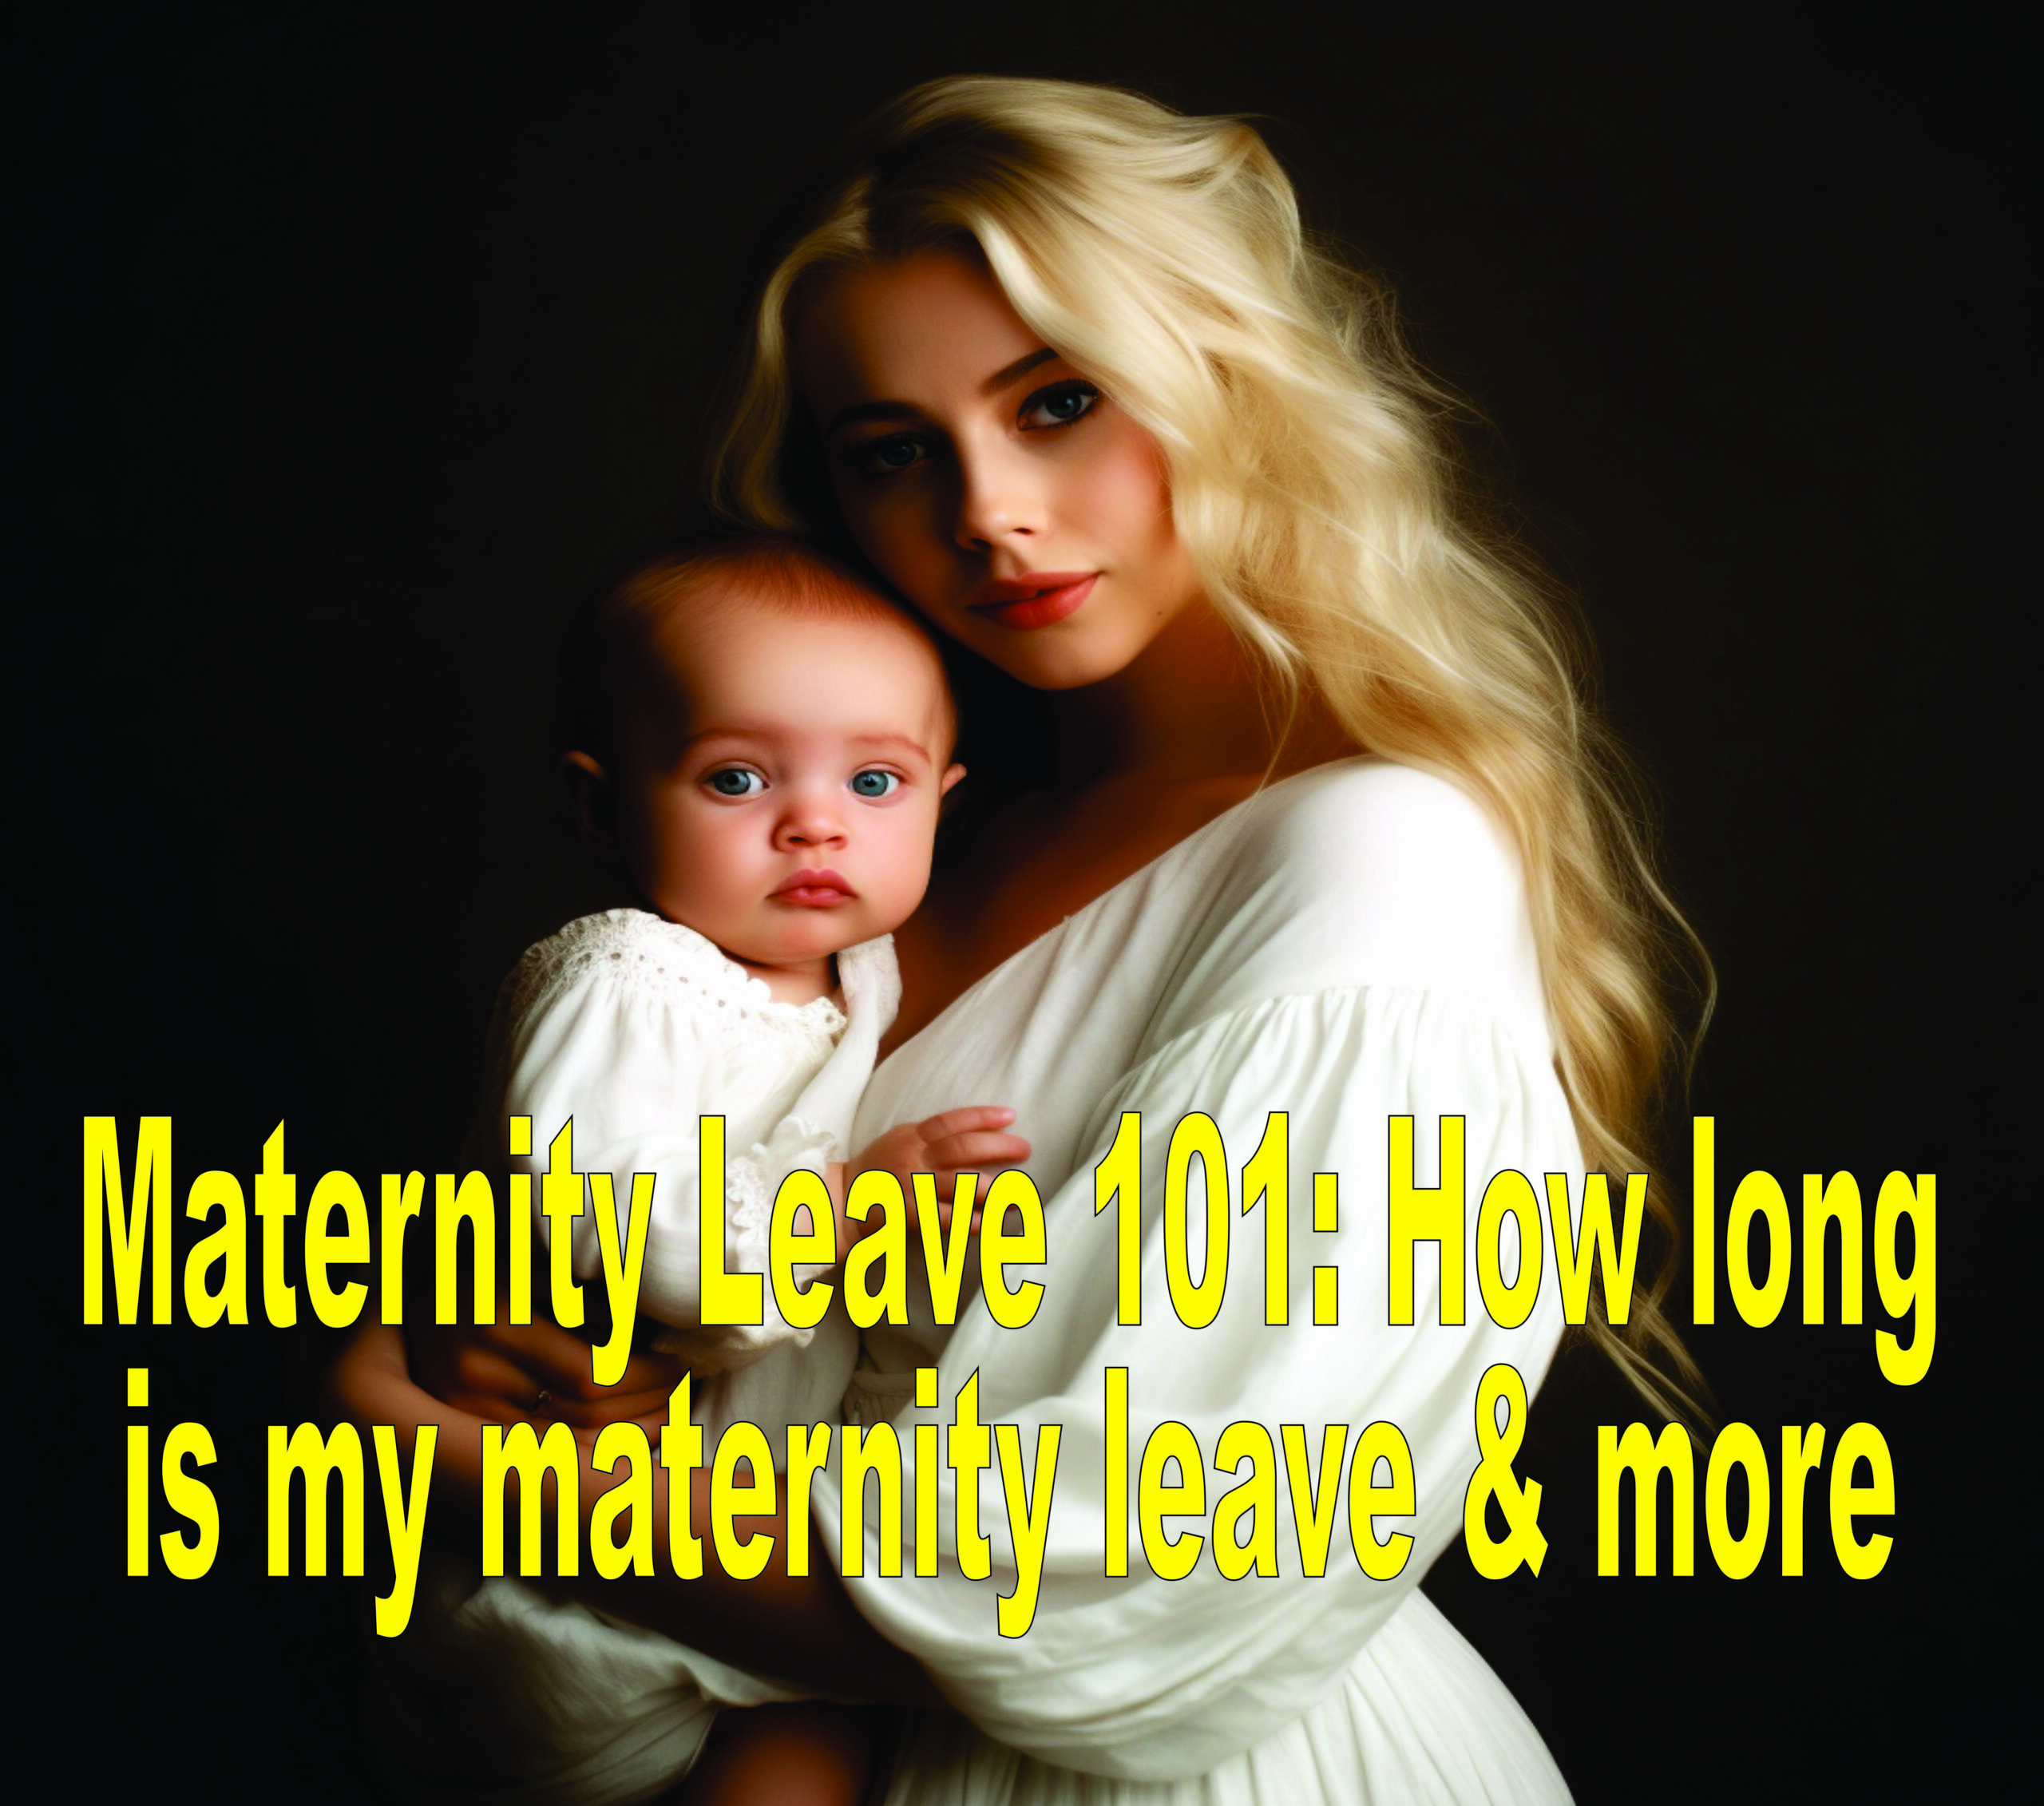 Maternity Leave 101how Long Is My Maternity Leave & More